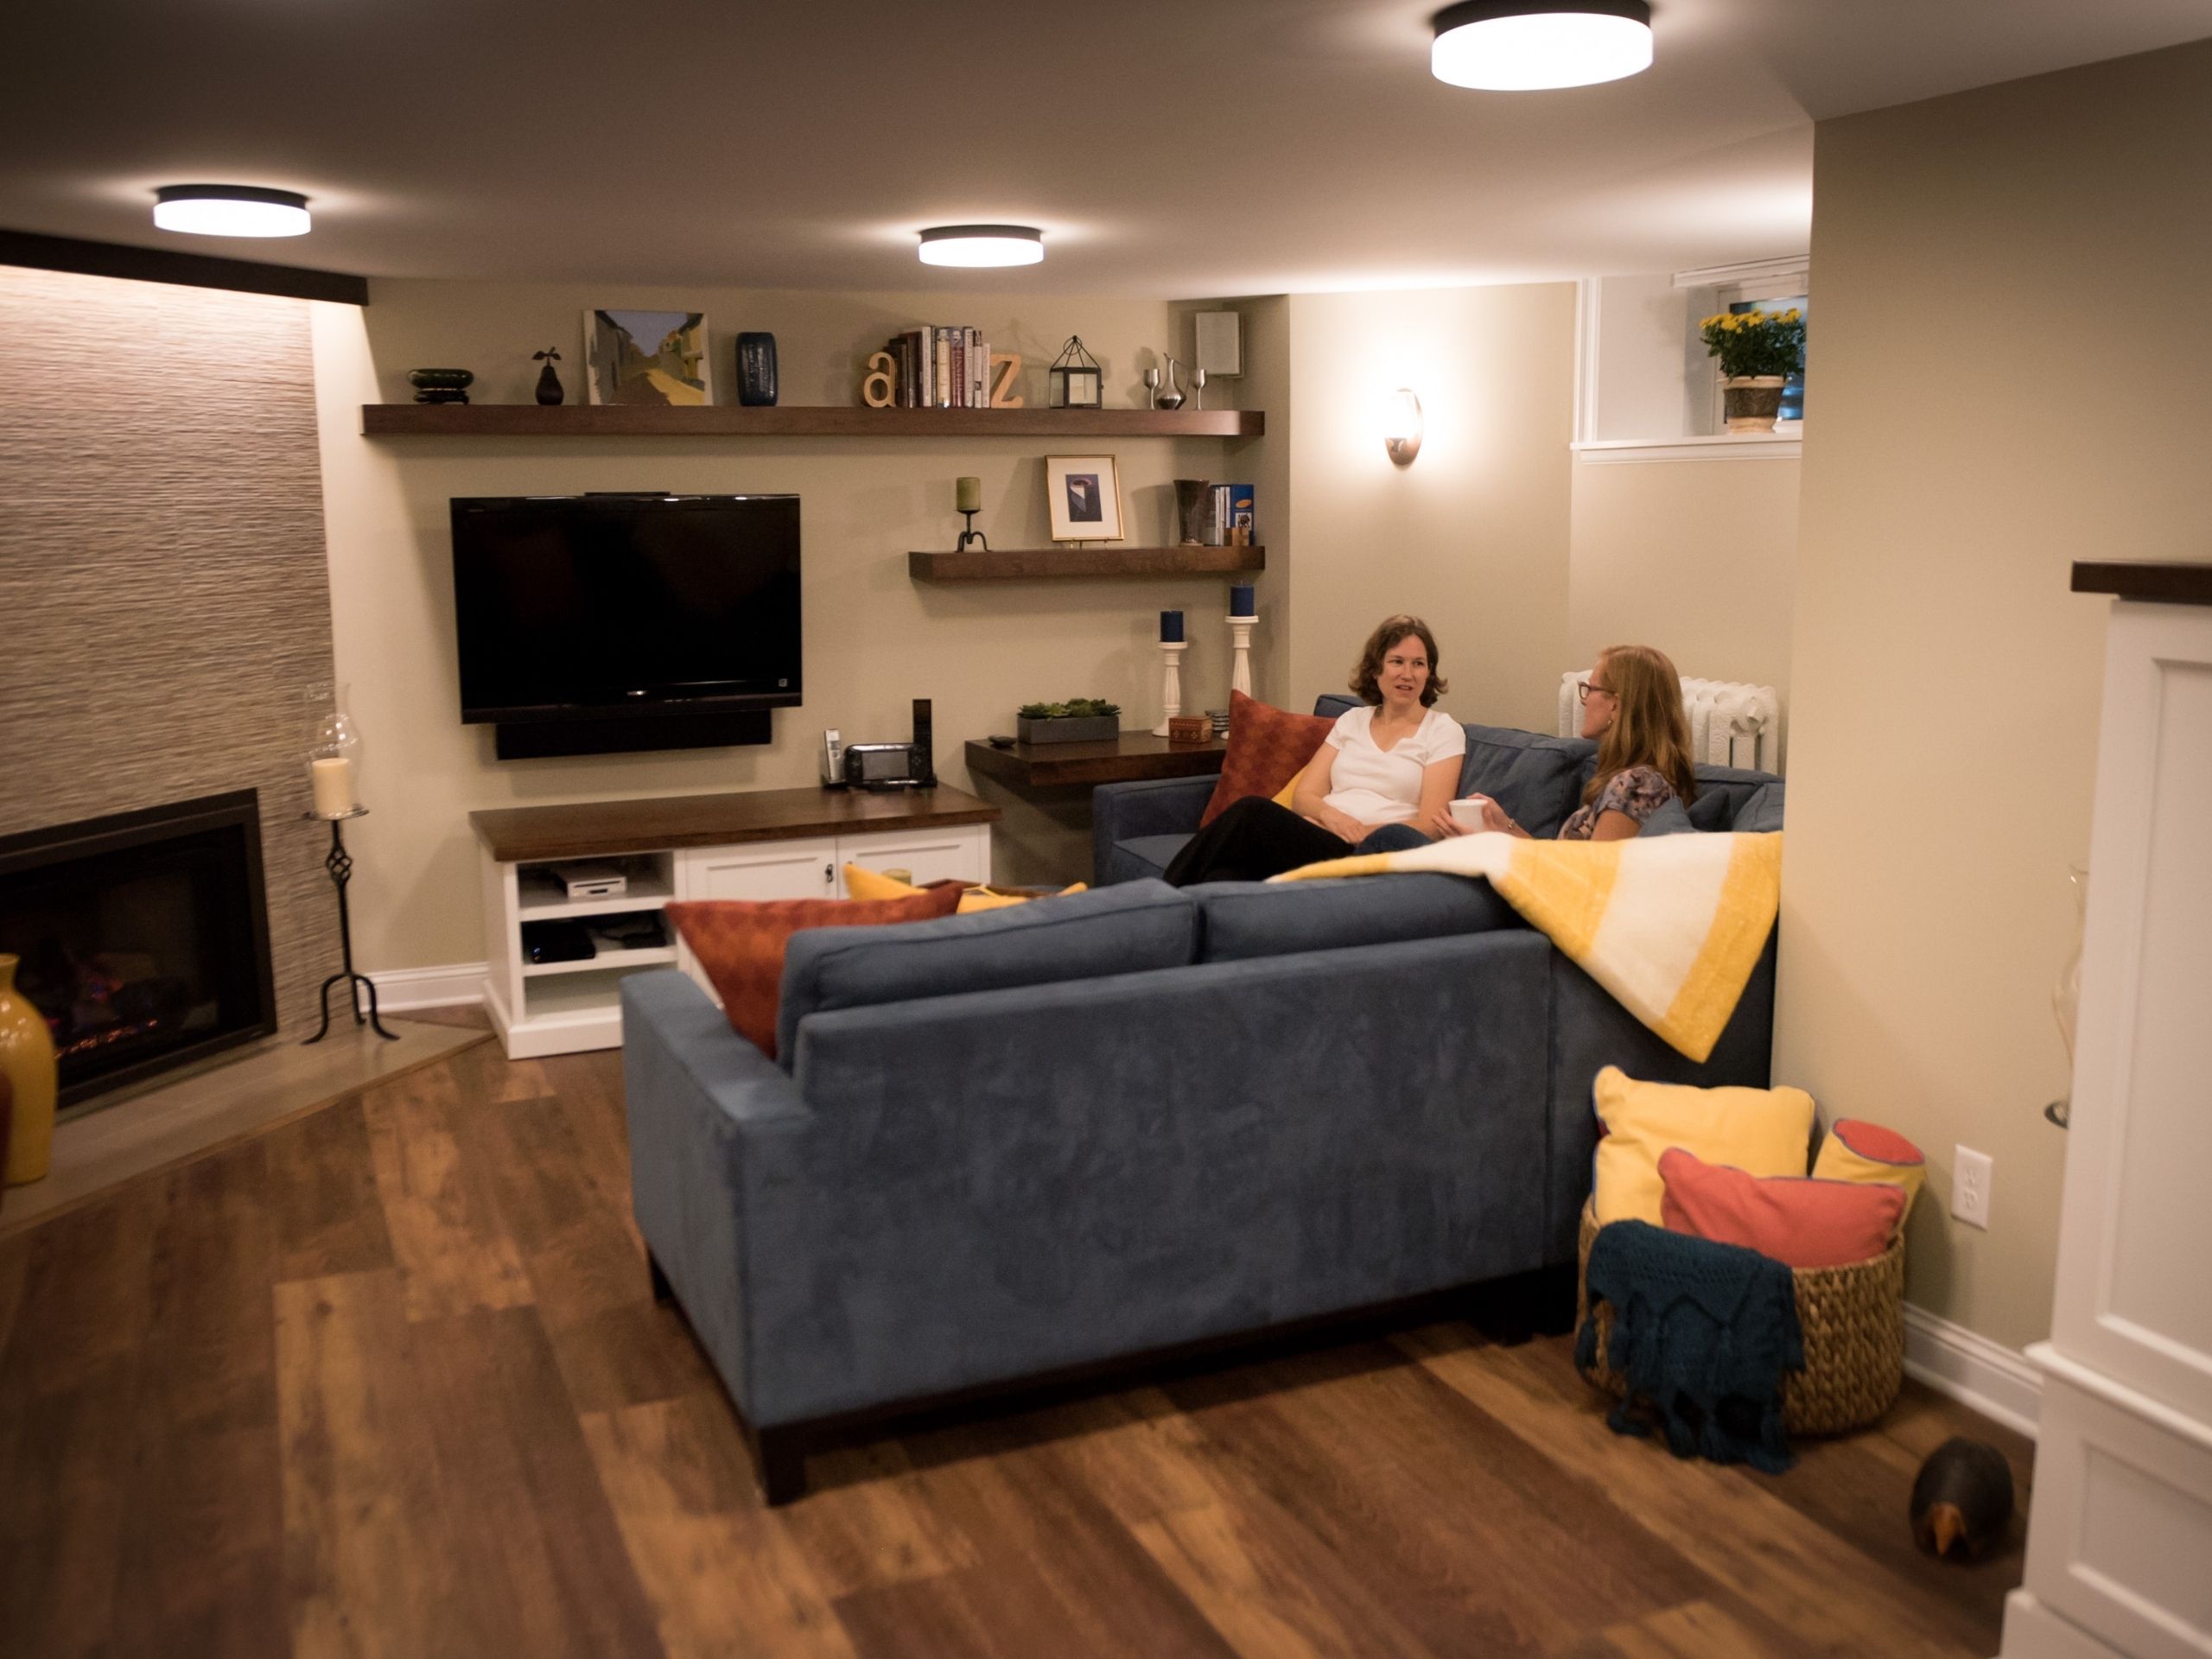 basement remodeling ideas: Basement fireplace and tv area with two people talking on the couch